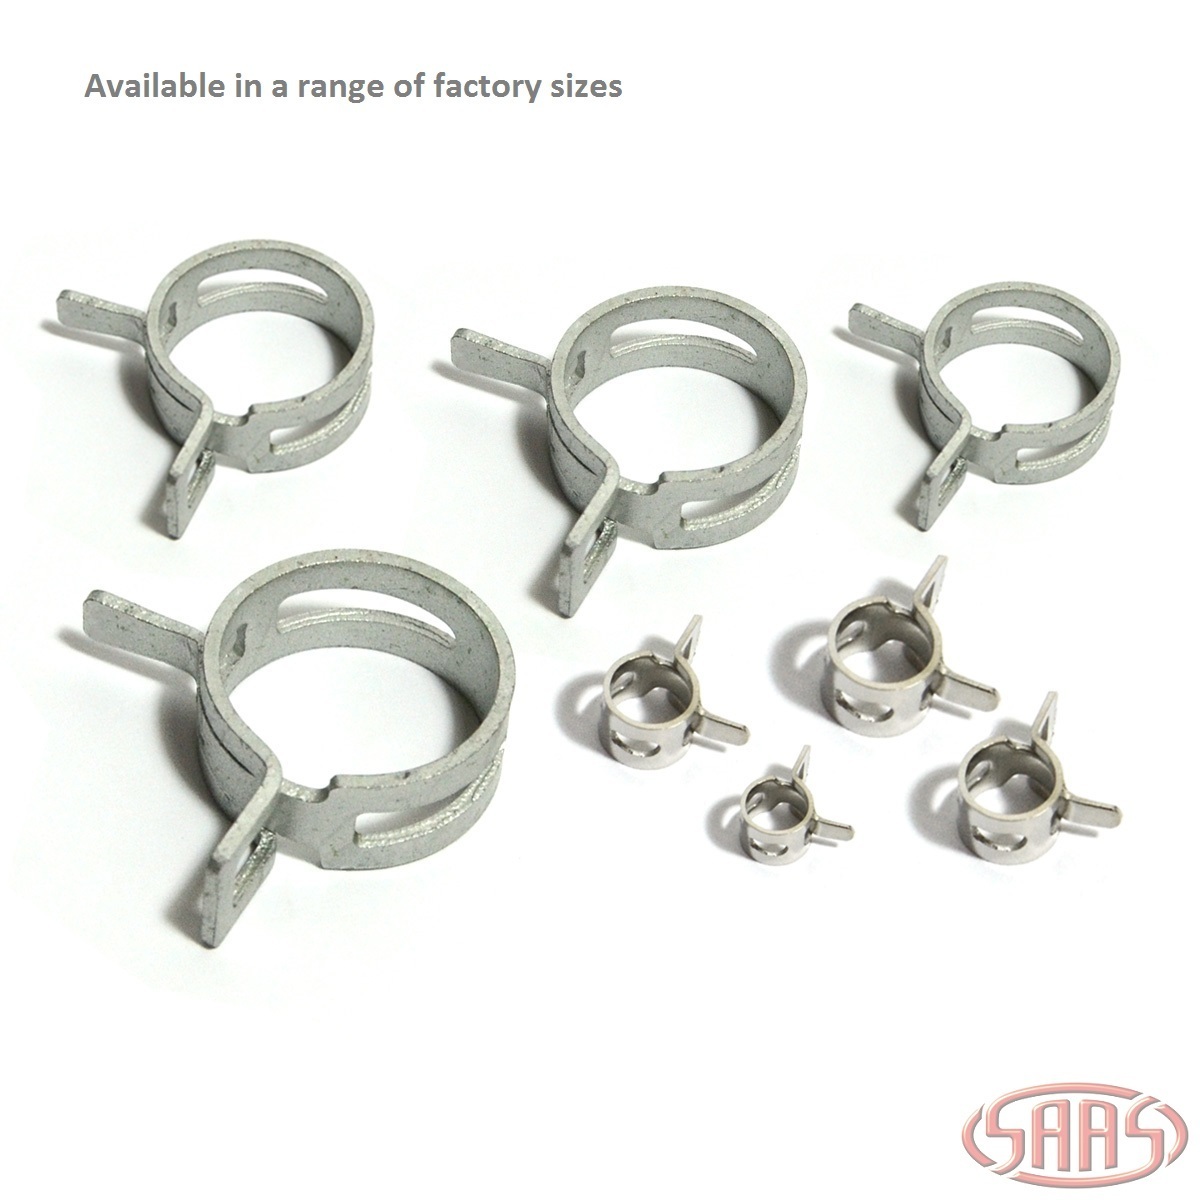 Hose Clamps Spring Size 4 suits 4mm (5/32") hose Pack of 6